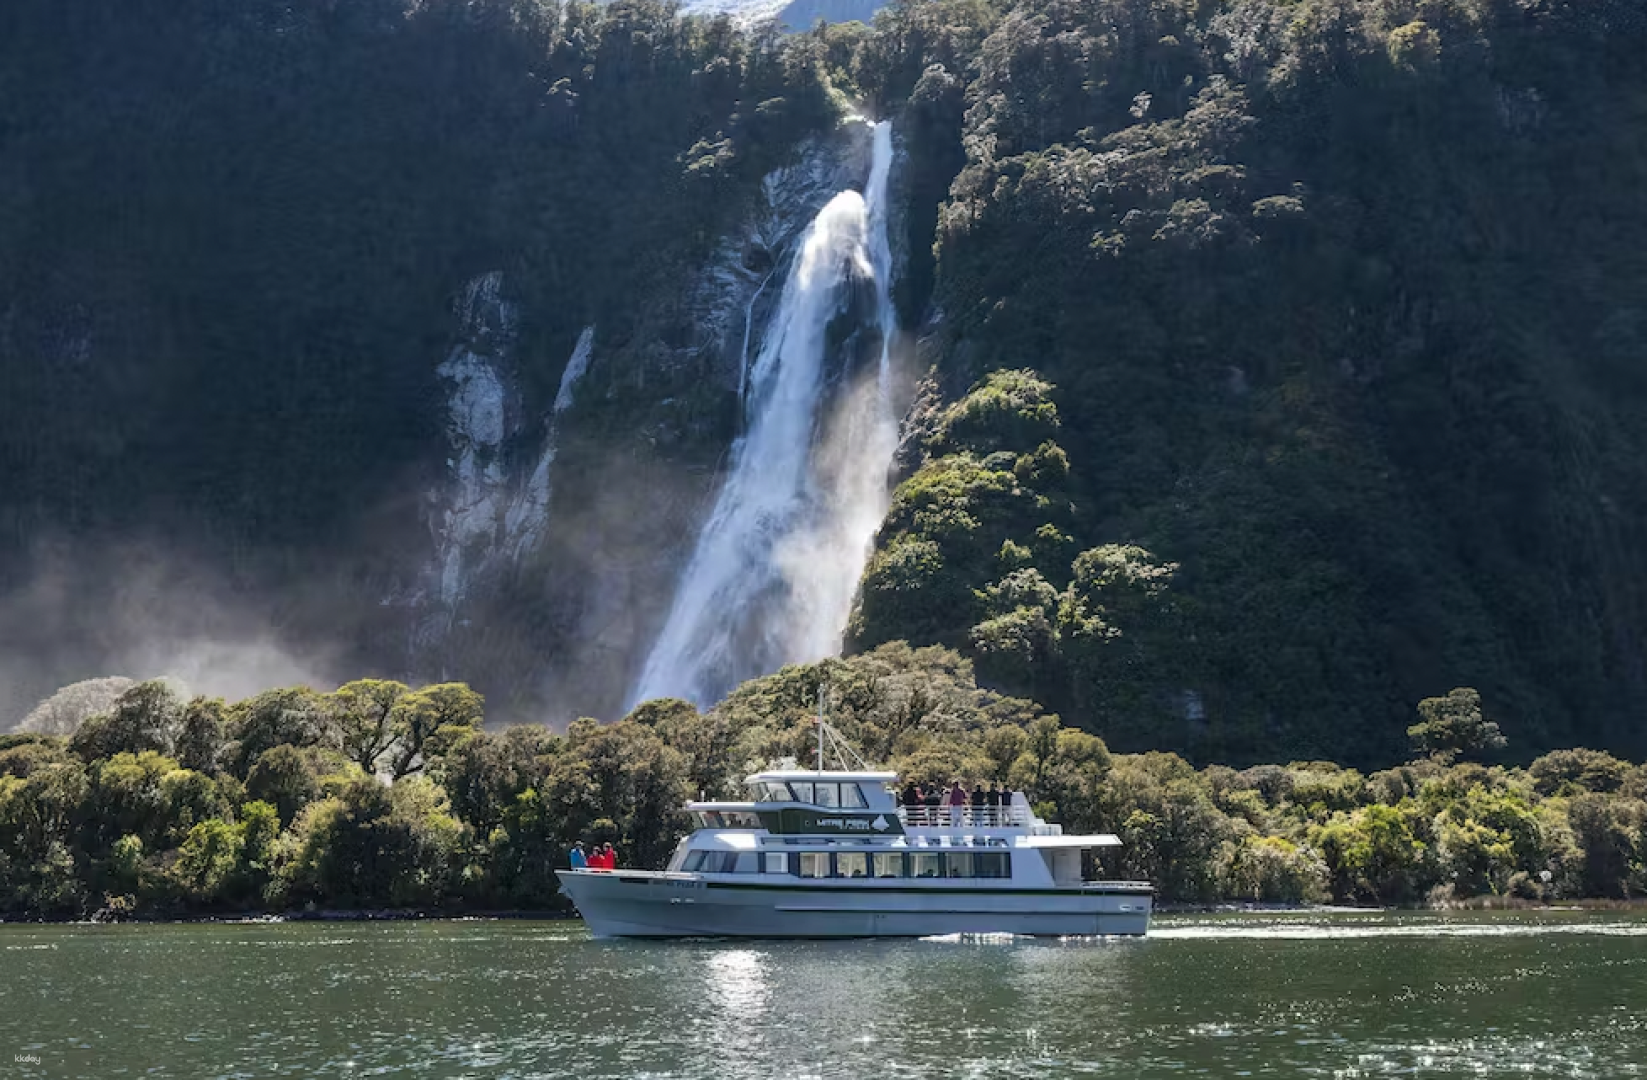 Milford Sound Coach Cruise Coach Day tour from Queenstown | New Zealand